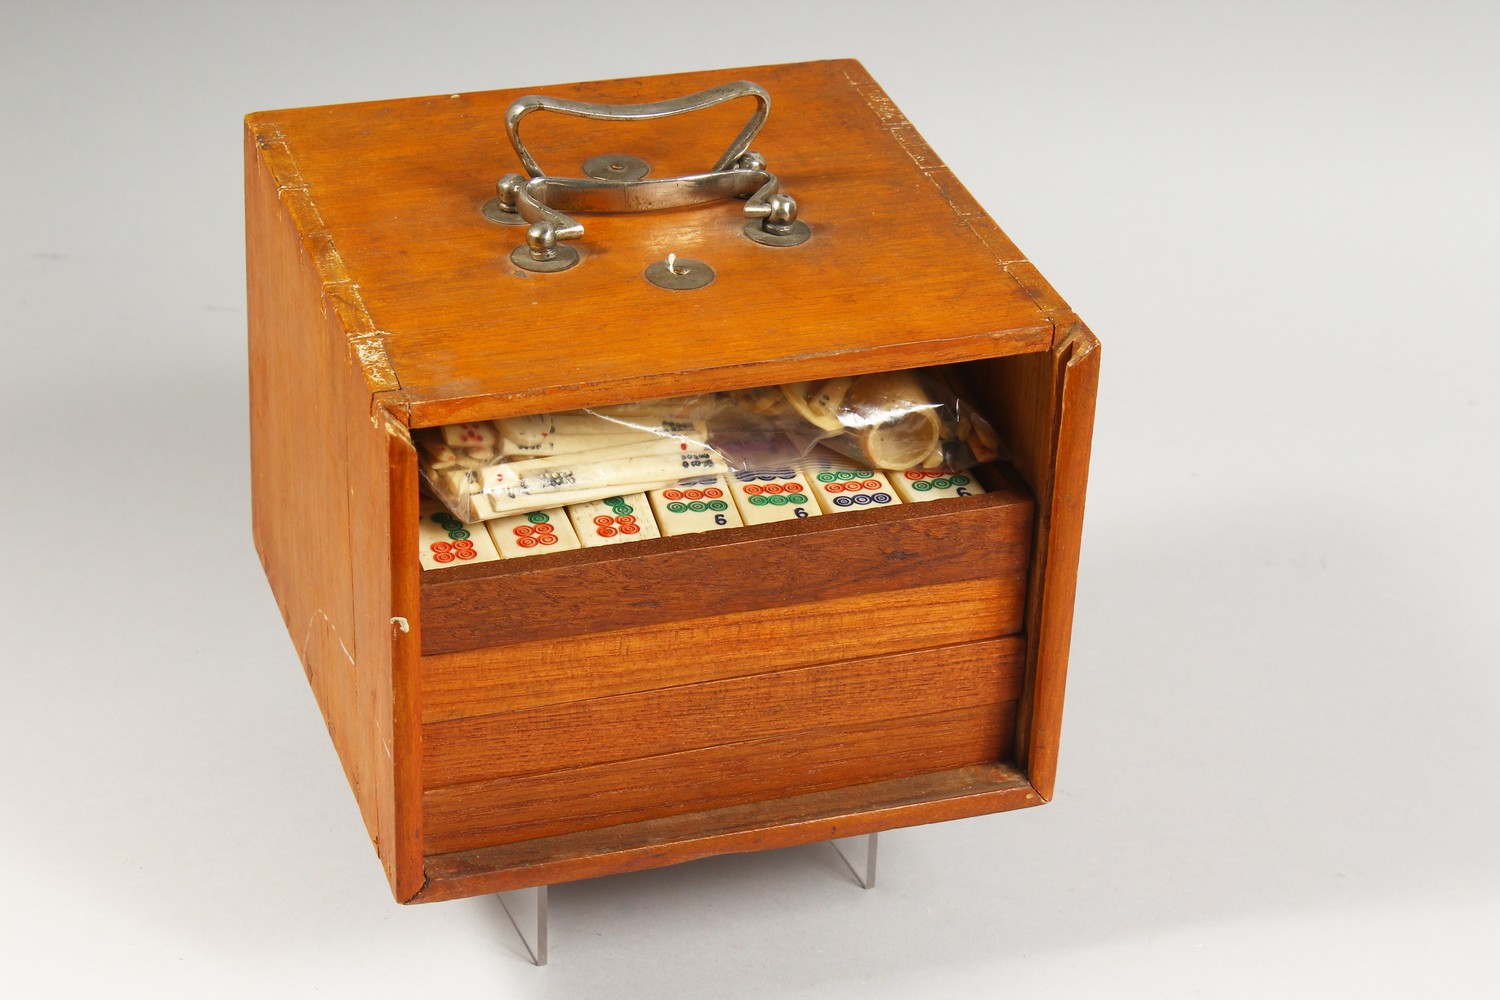 A GOOD 20TH CENTURY CHINESE MAHJONG GAMES BOX WITH ITS BONE PIECES, the front with a removable panel - Image 9 of 10